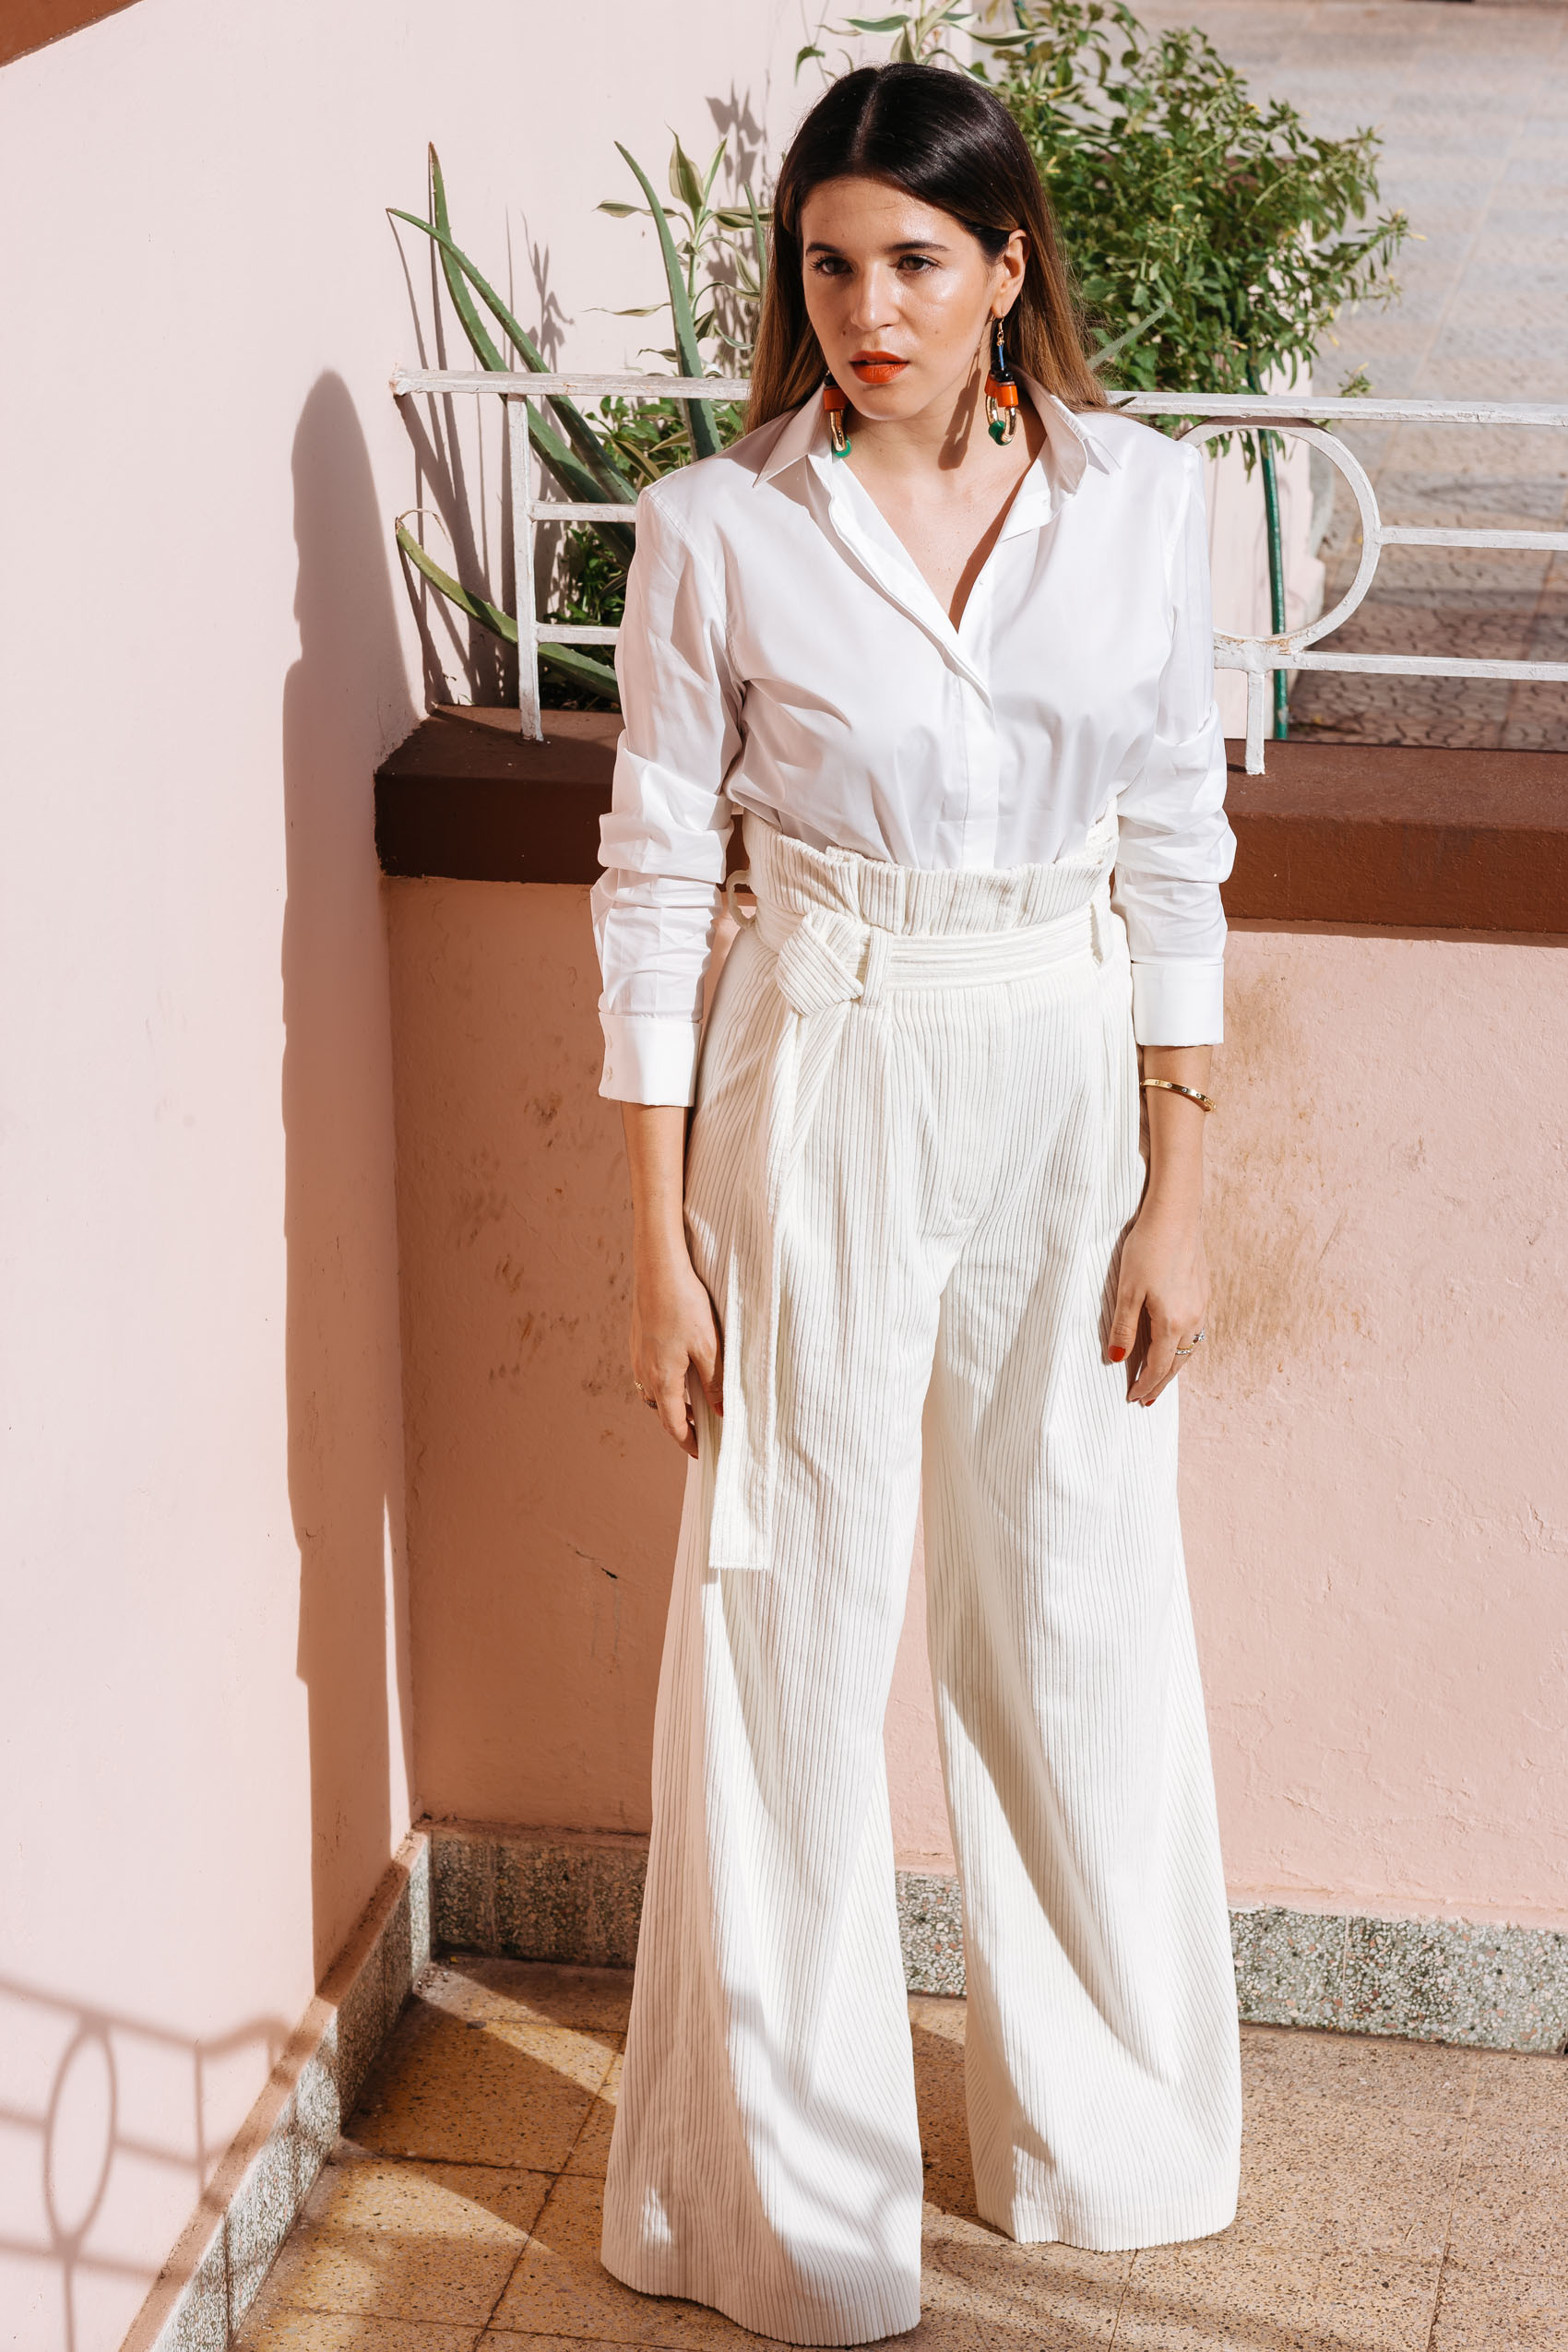 Maristella's all white shirt and pants H&M Studio look